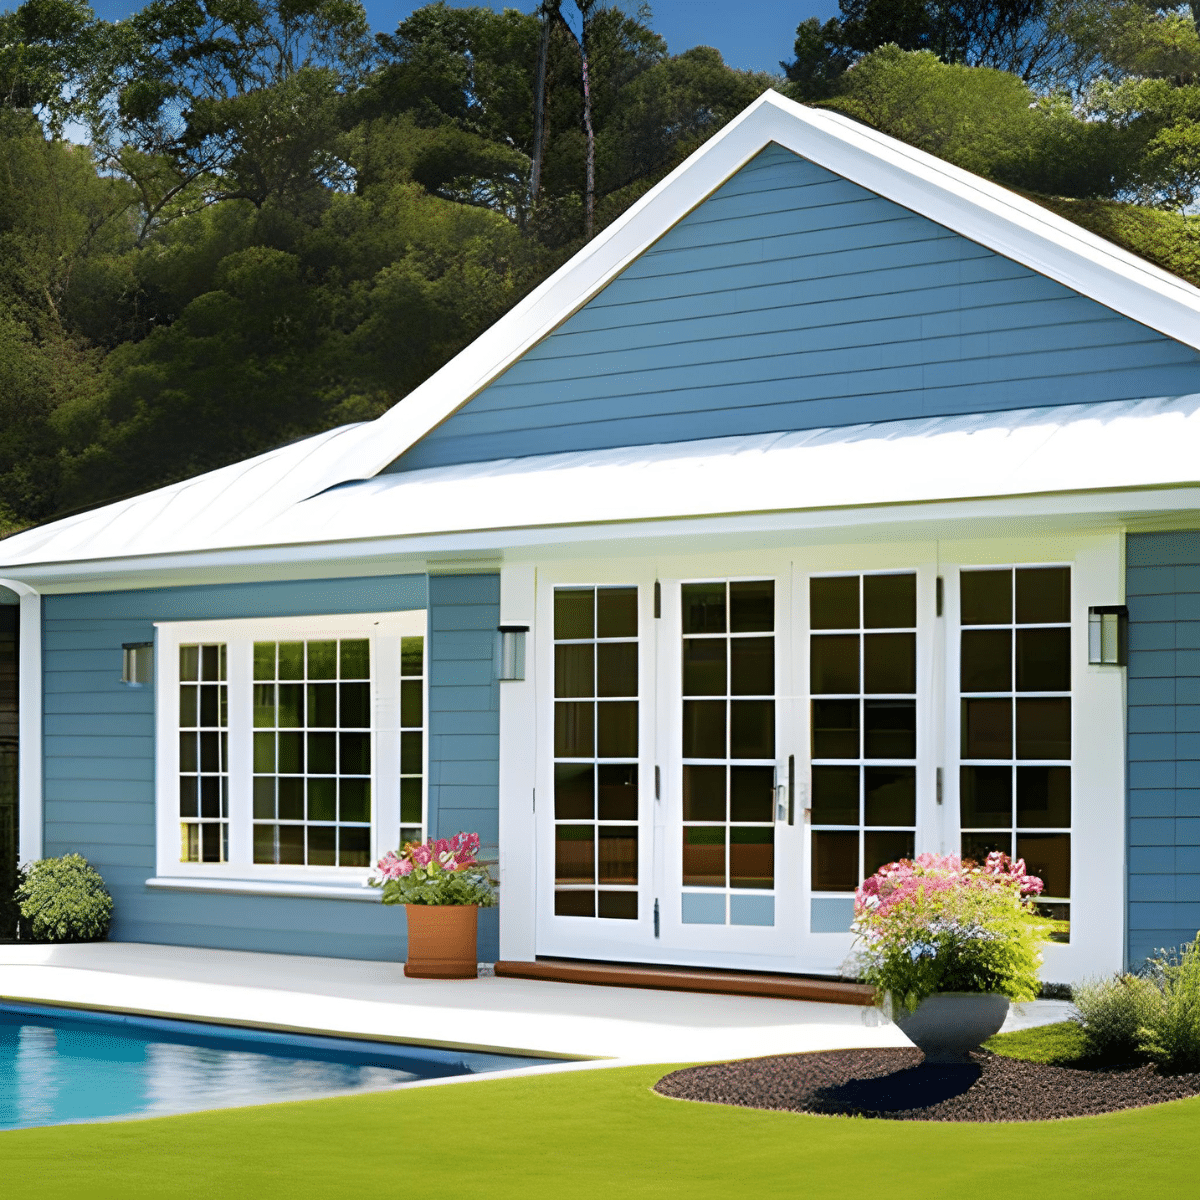 blue Hamptons style pool house with white details and French doors